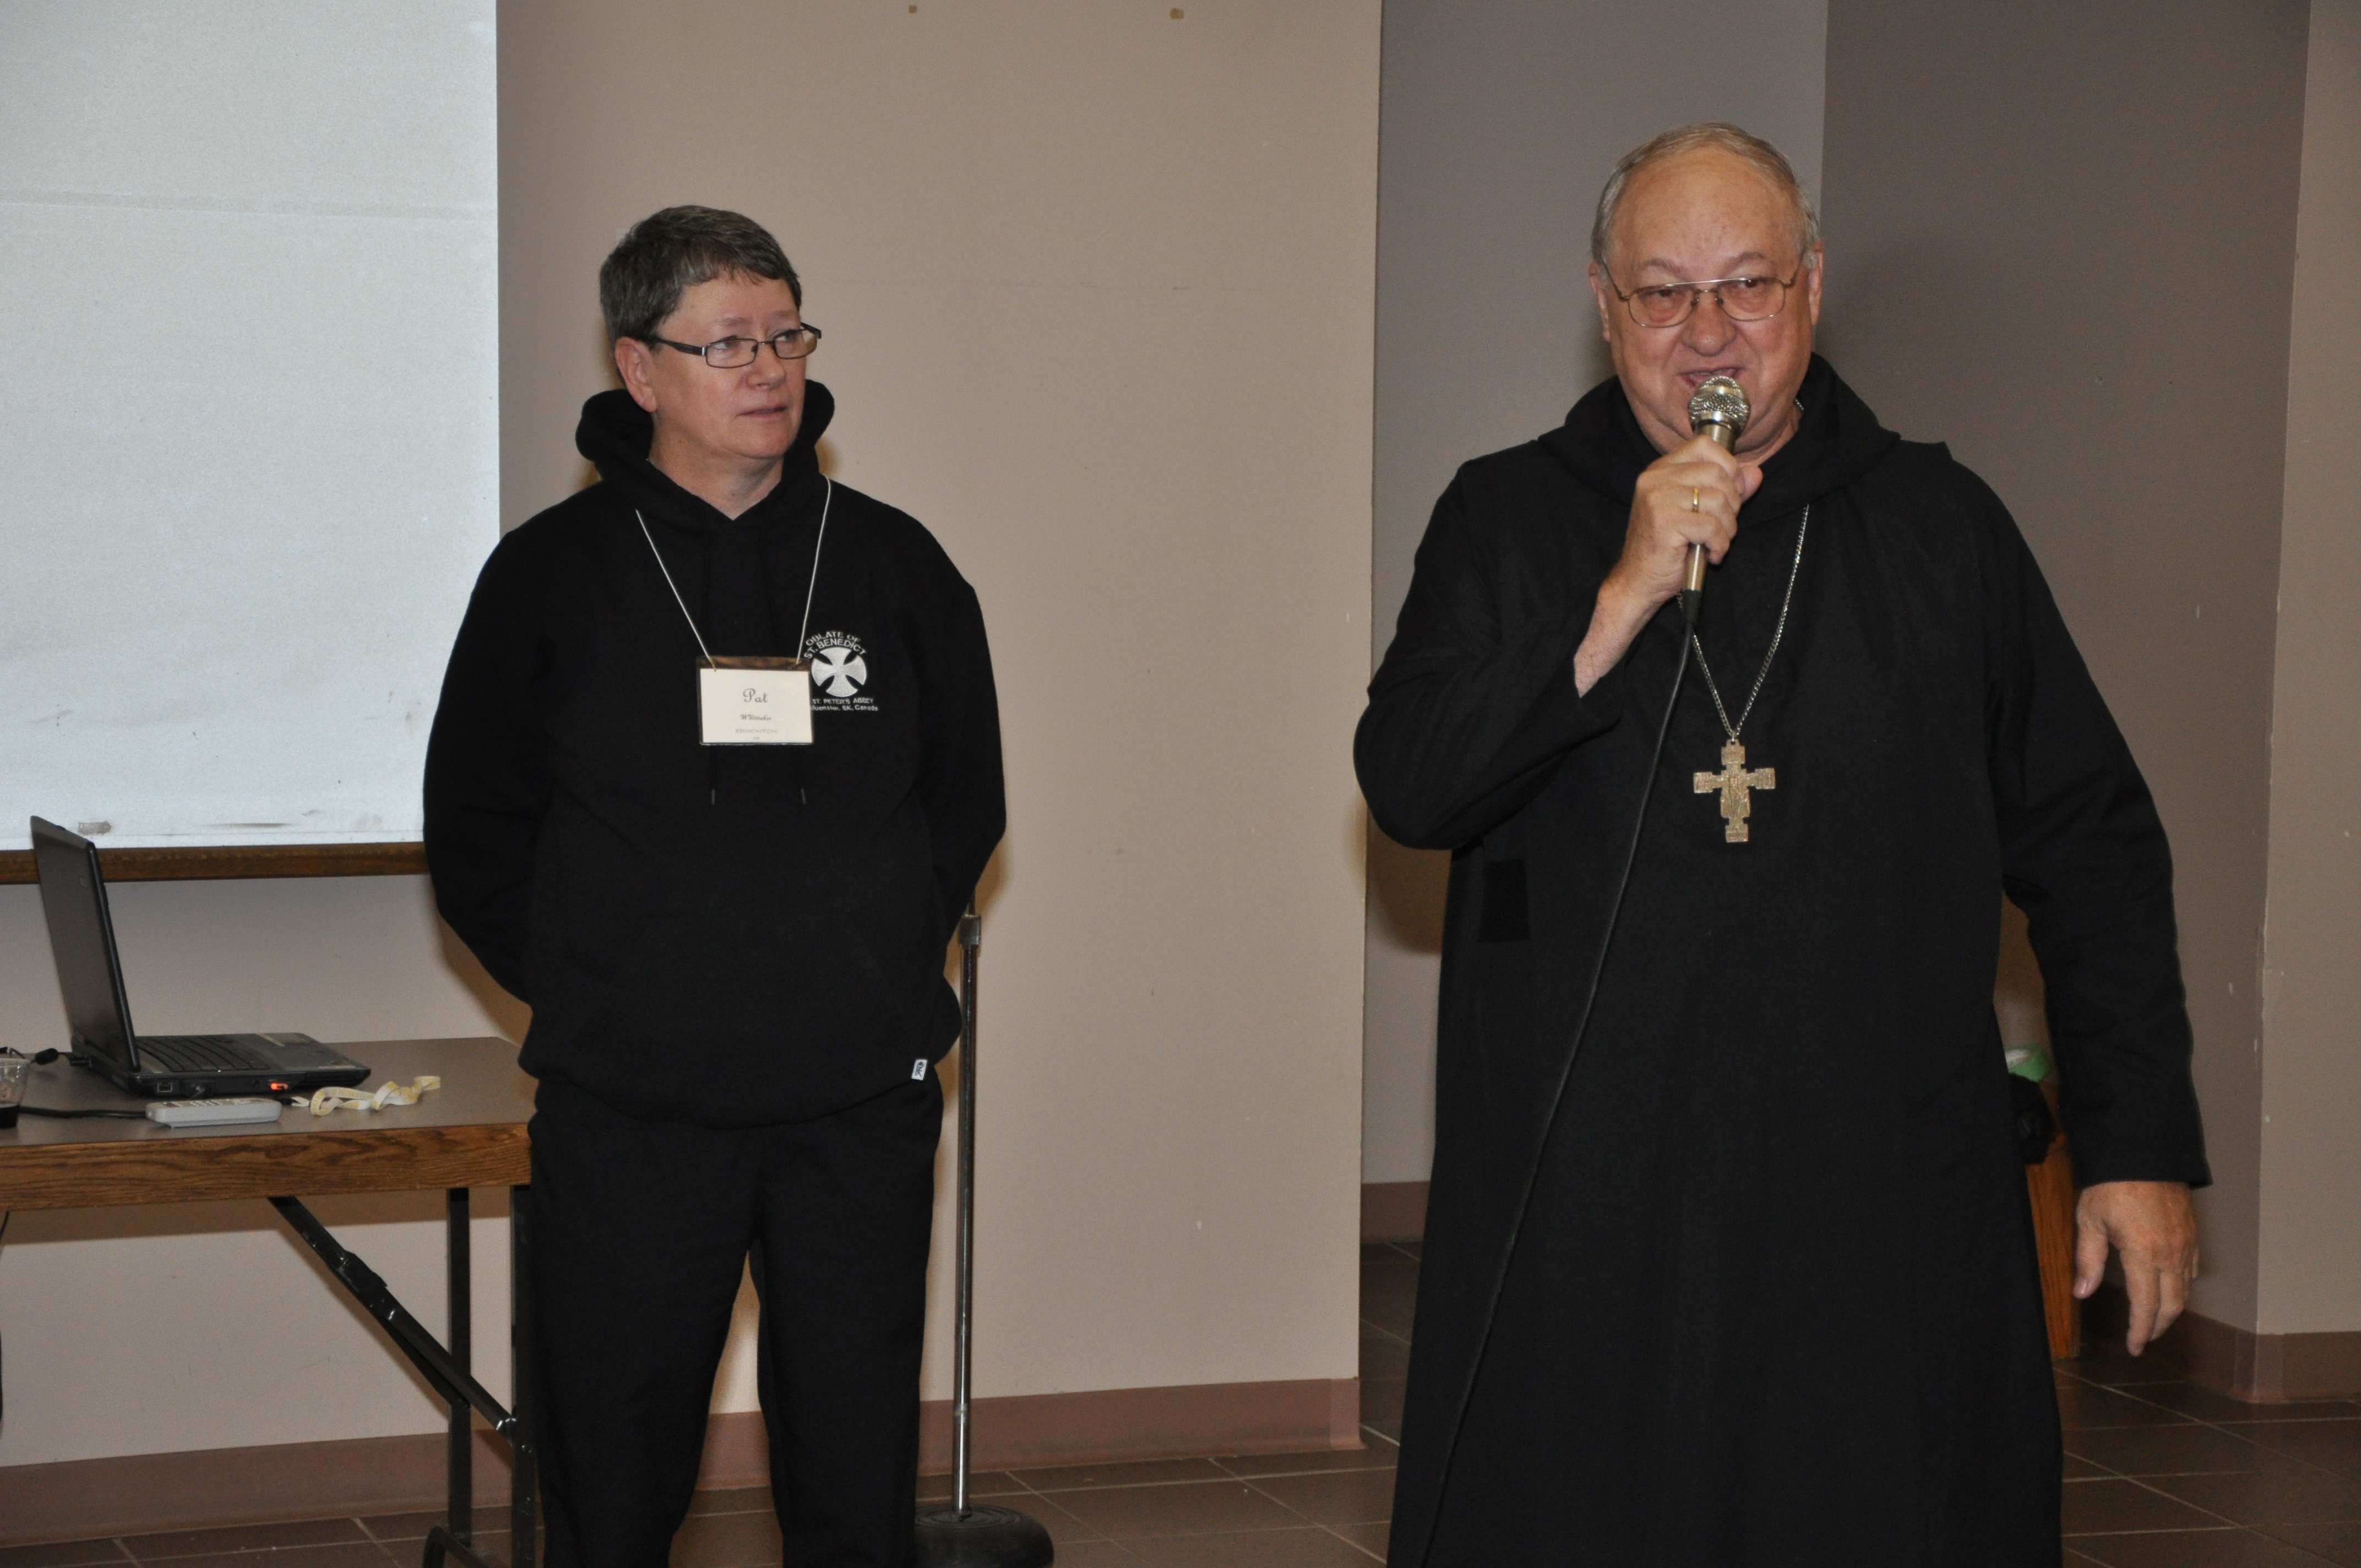 Abbot Peter Novecosky, OSB and Pat Whittaker, OblSB, address the November 2, 2013 meeting.